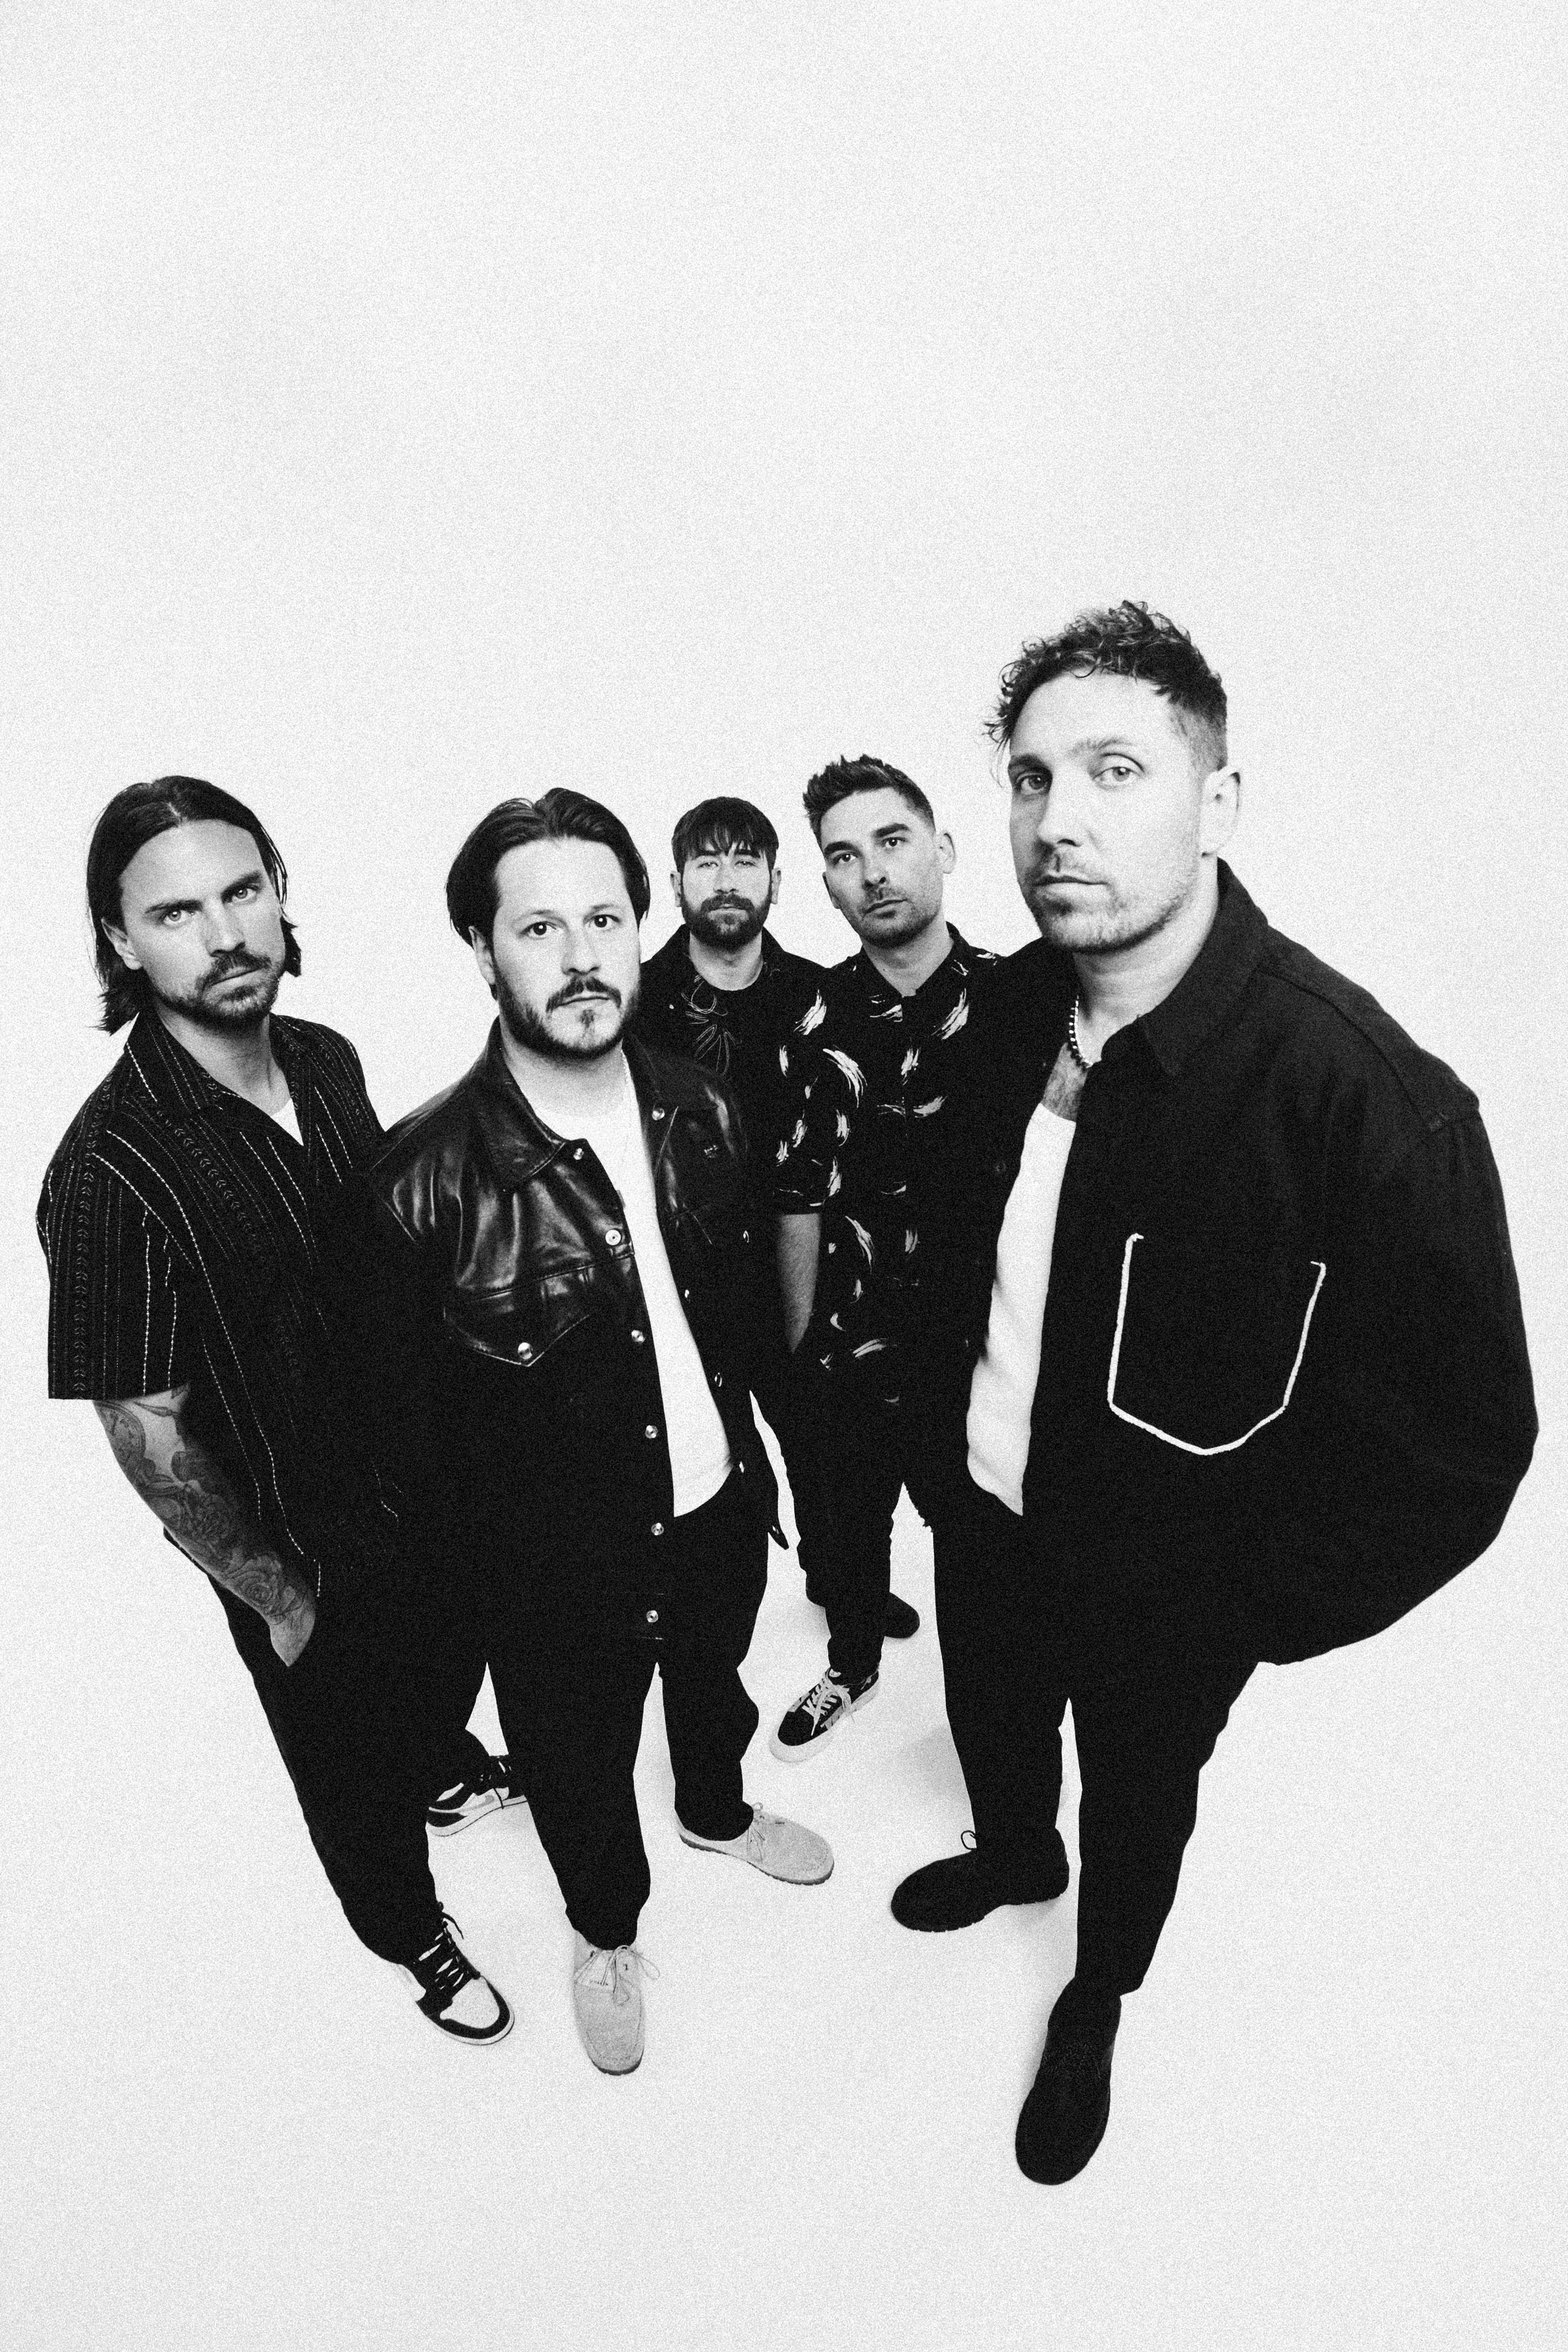 You Me At Six - the Final Nights of Six presale passw0rd